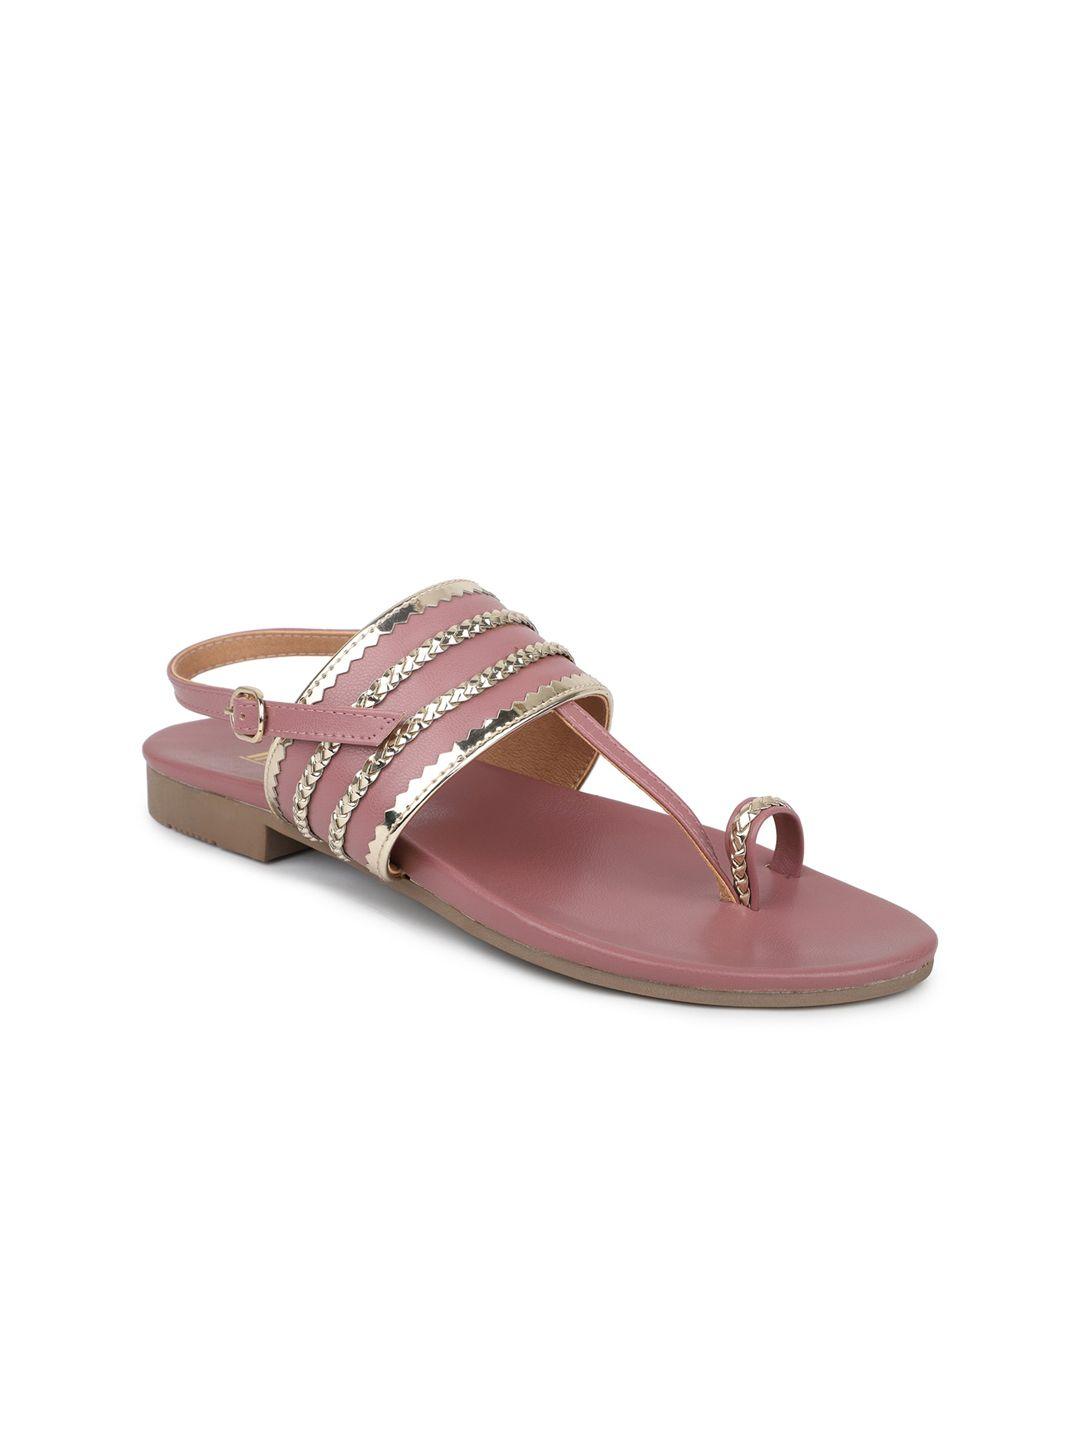 inc 5 braided ethnic one toe flats with buckle closure